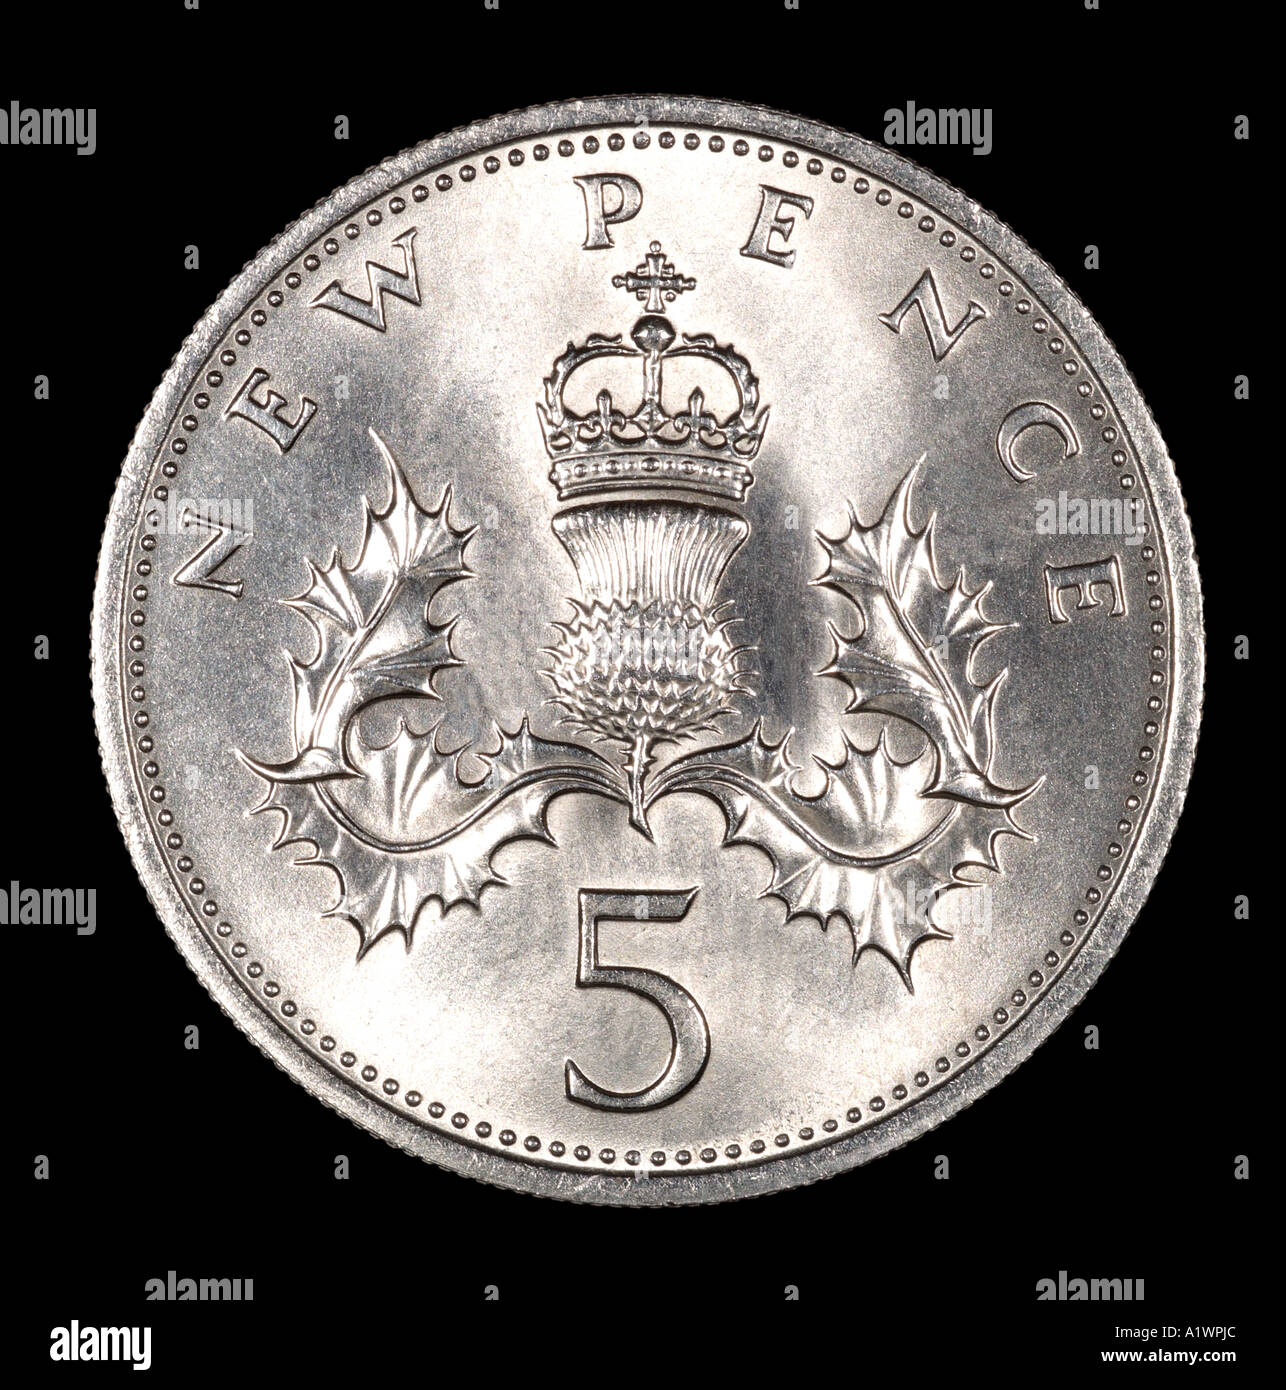 Queen Elizabeth 2 II Reg Regina Decimal 5 five new pence P face right young profile crown thistle holly silver bright Stock Photo